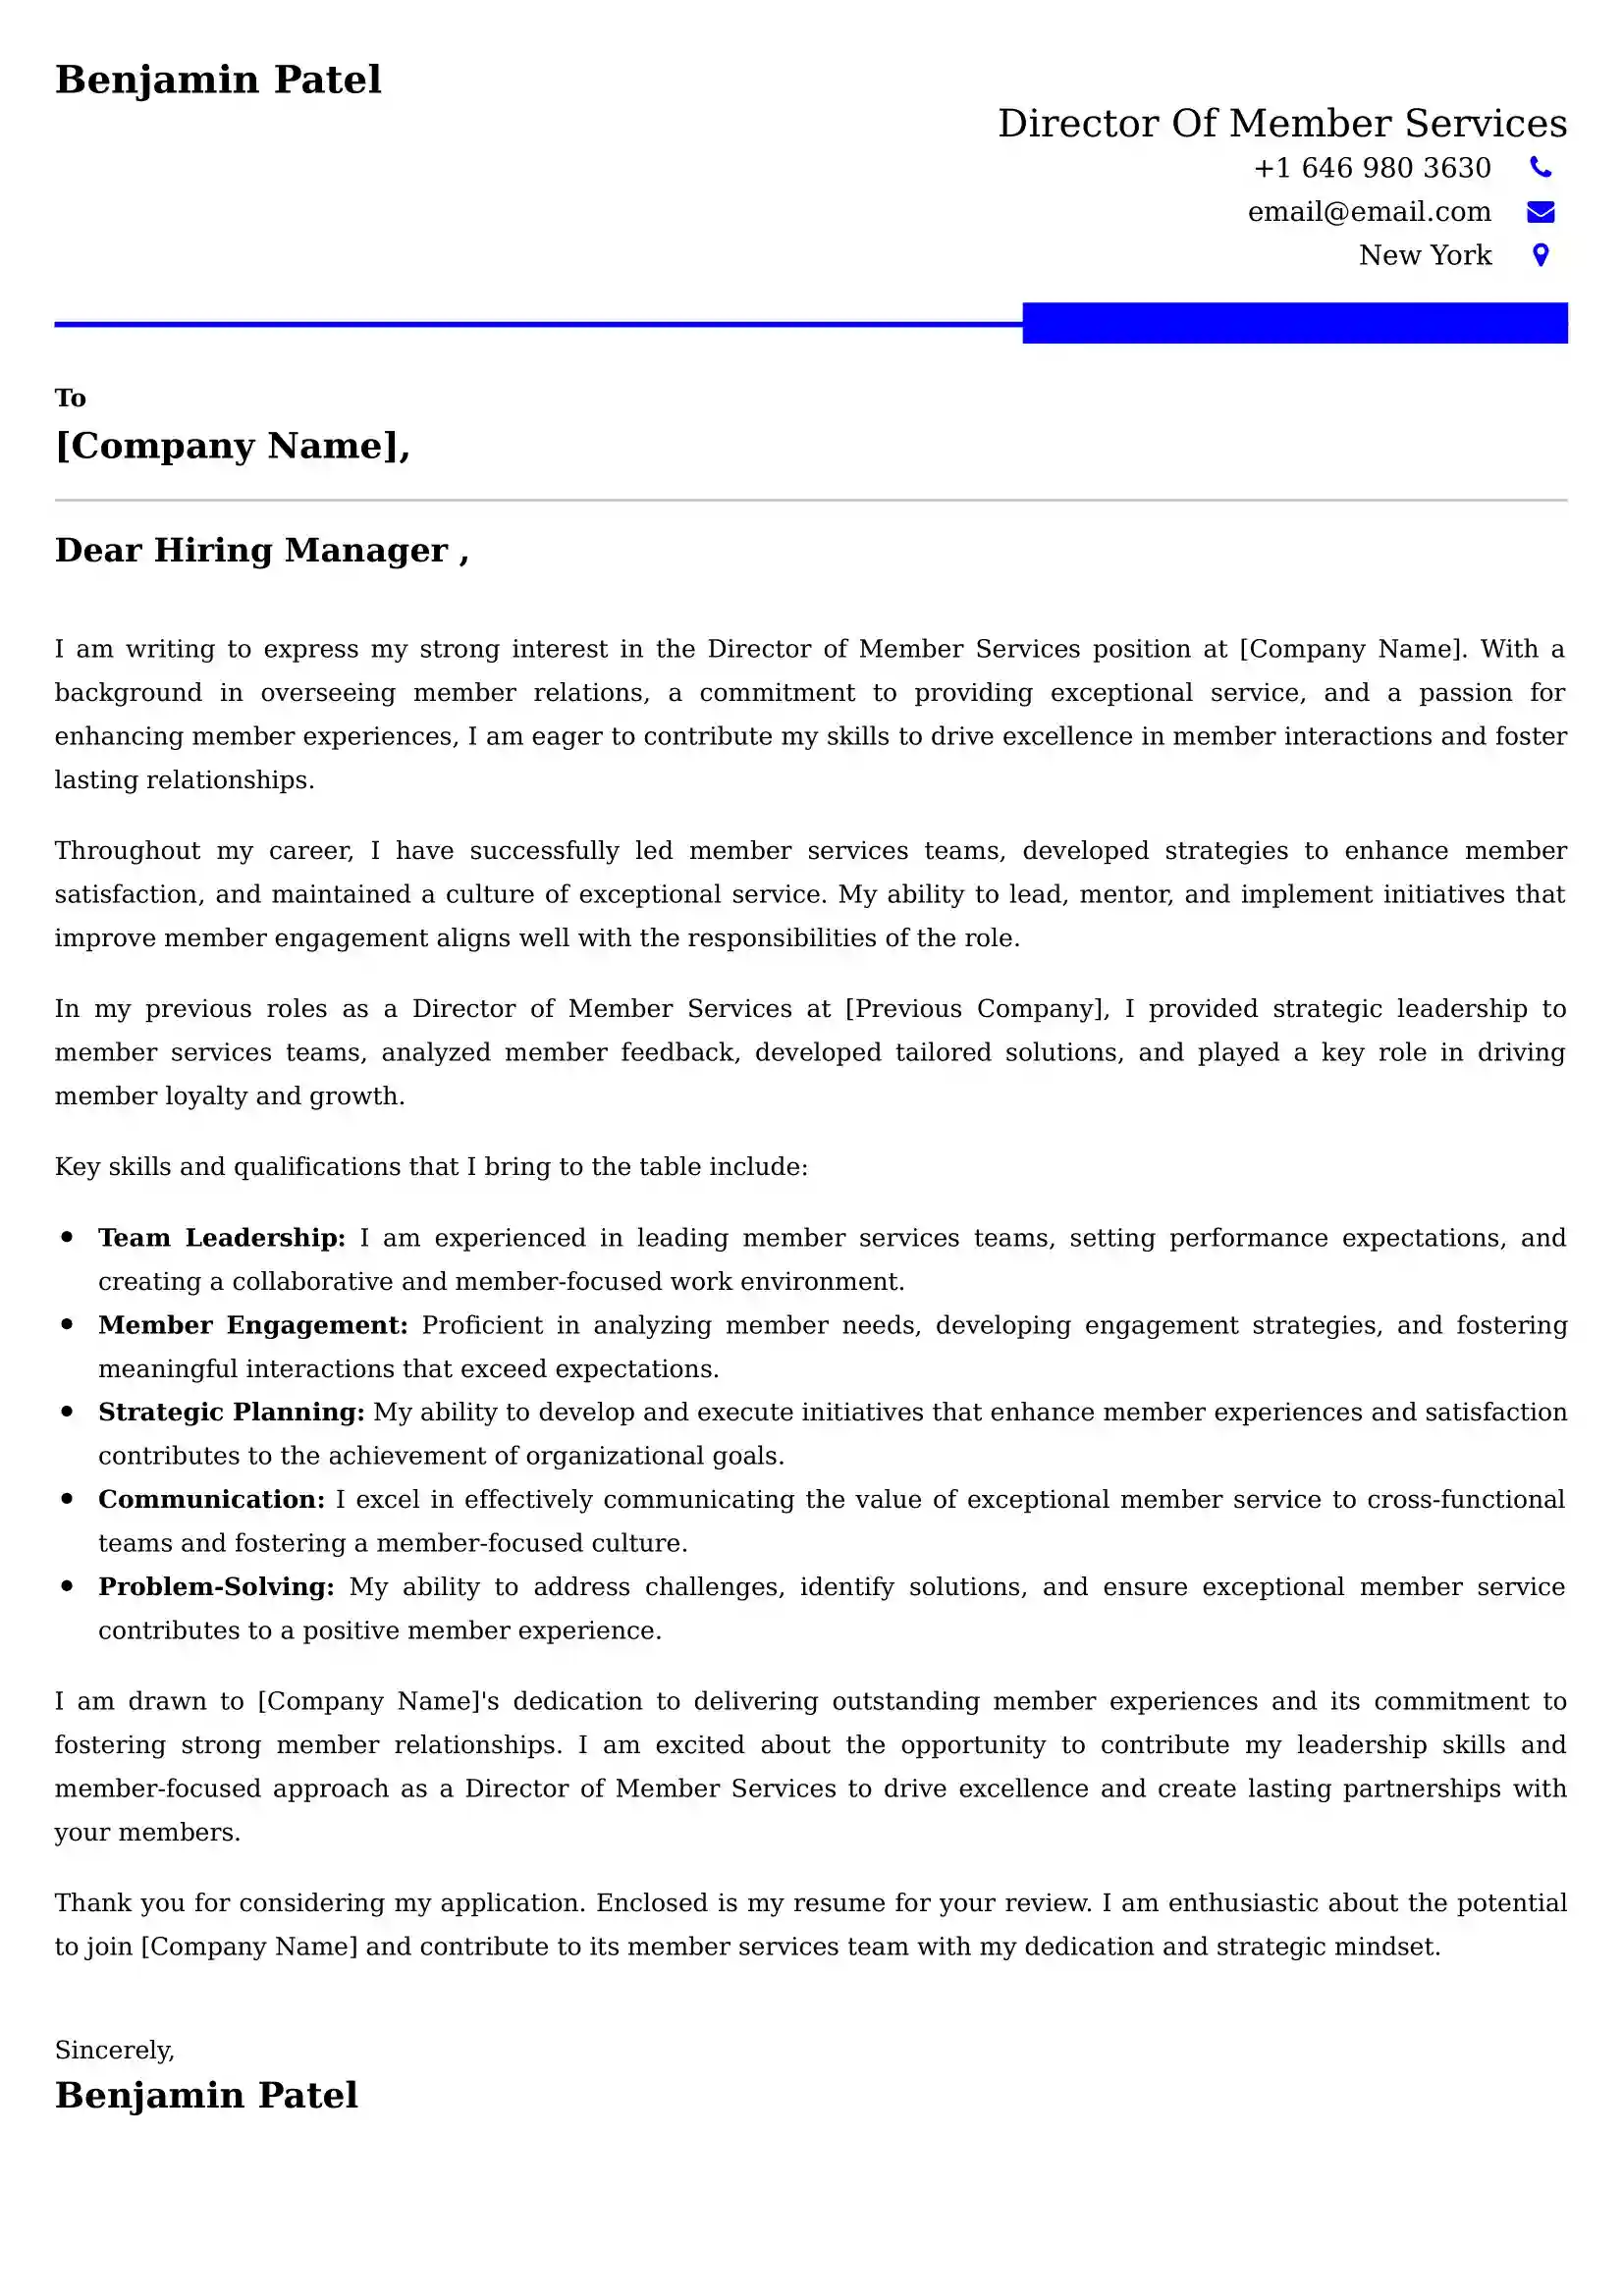 Director Of Member Services Cover Letter Examples -Latest Brazilian Templates